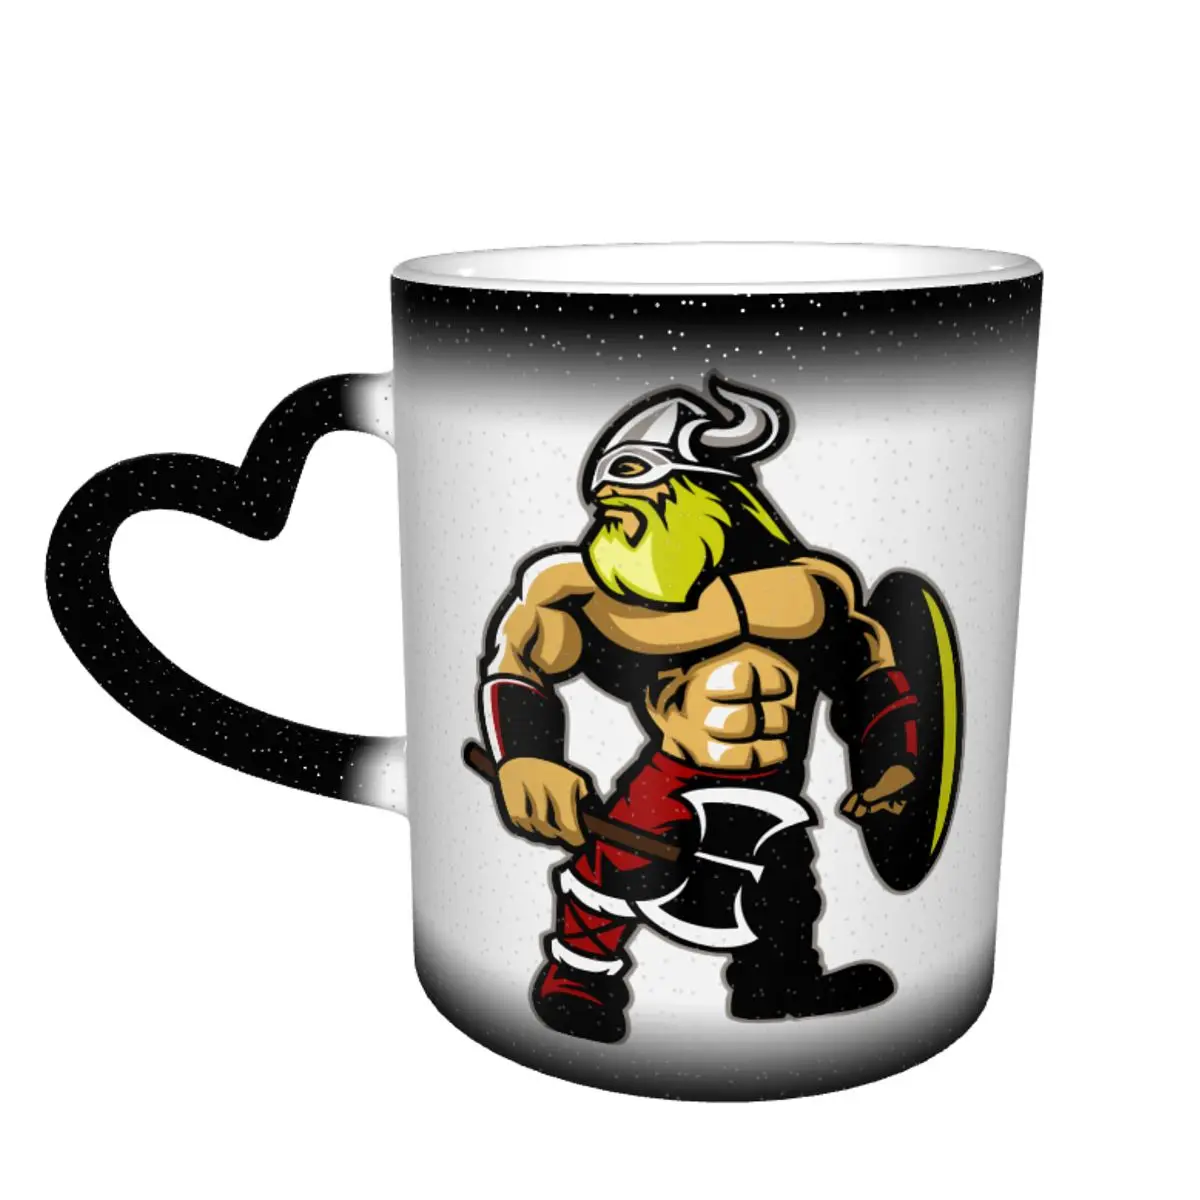 

Color Changing Mug in the Sky Viking Warrior With An Axe Viking Creative Vikings Ceramic Heat-sensitive Cup Nerd Coffee cups